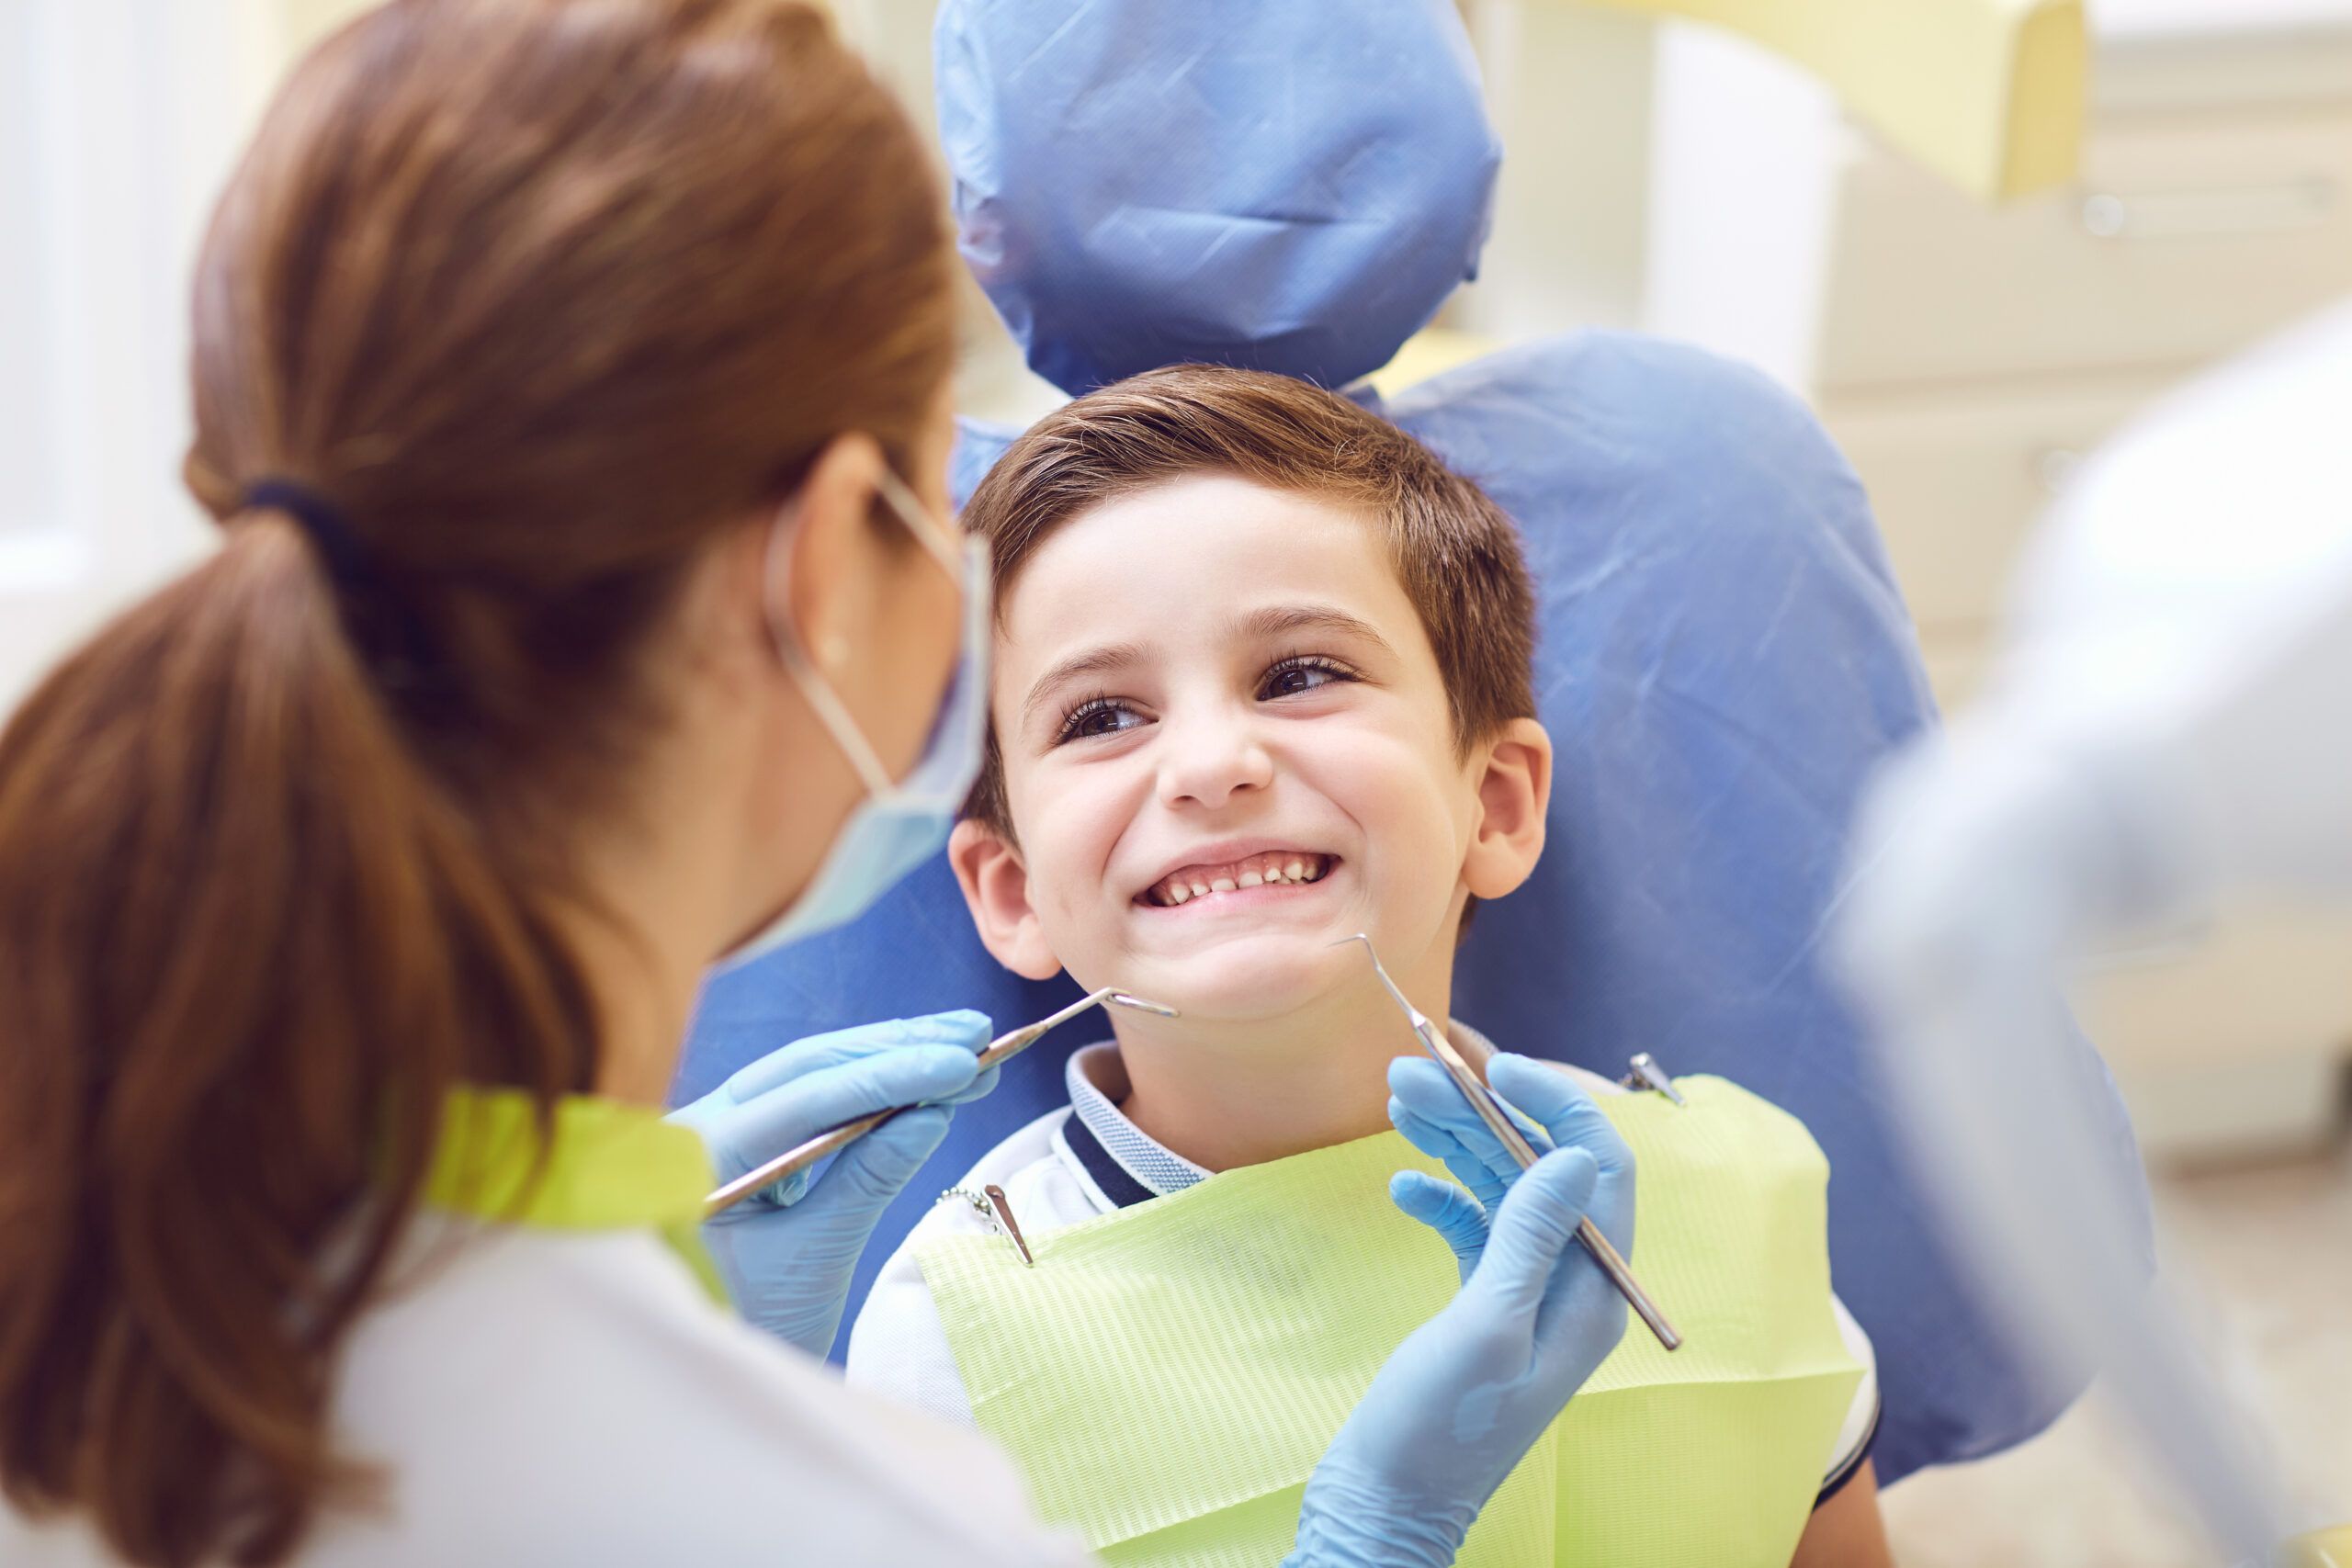 pediatric dentist helping child smile and feel calm in dental chair